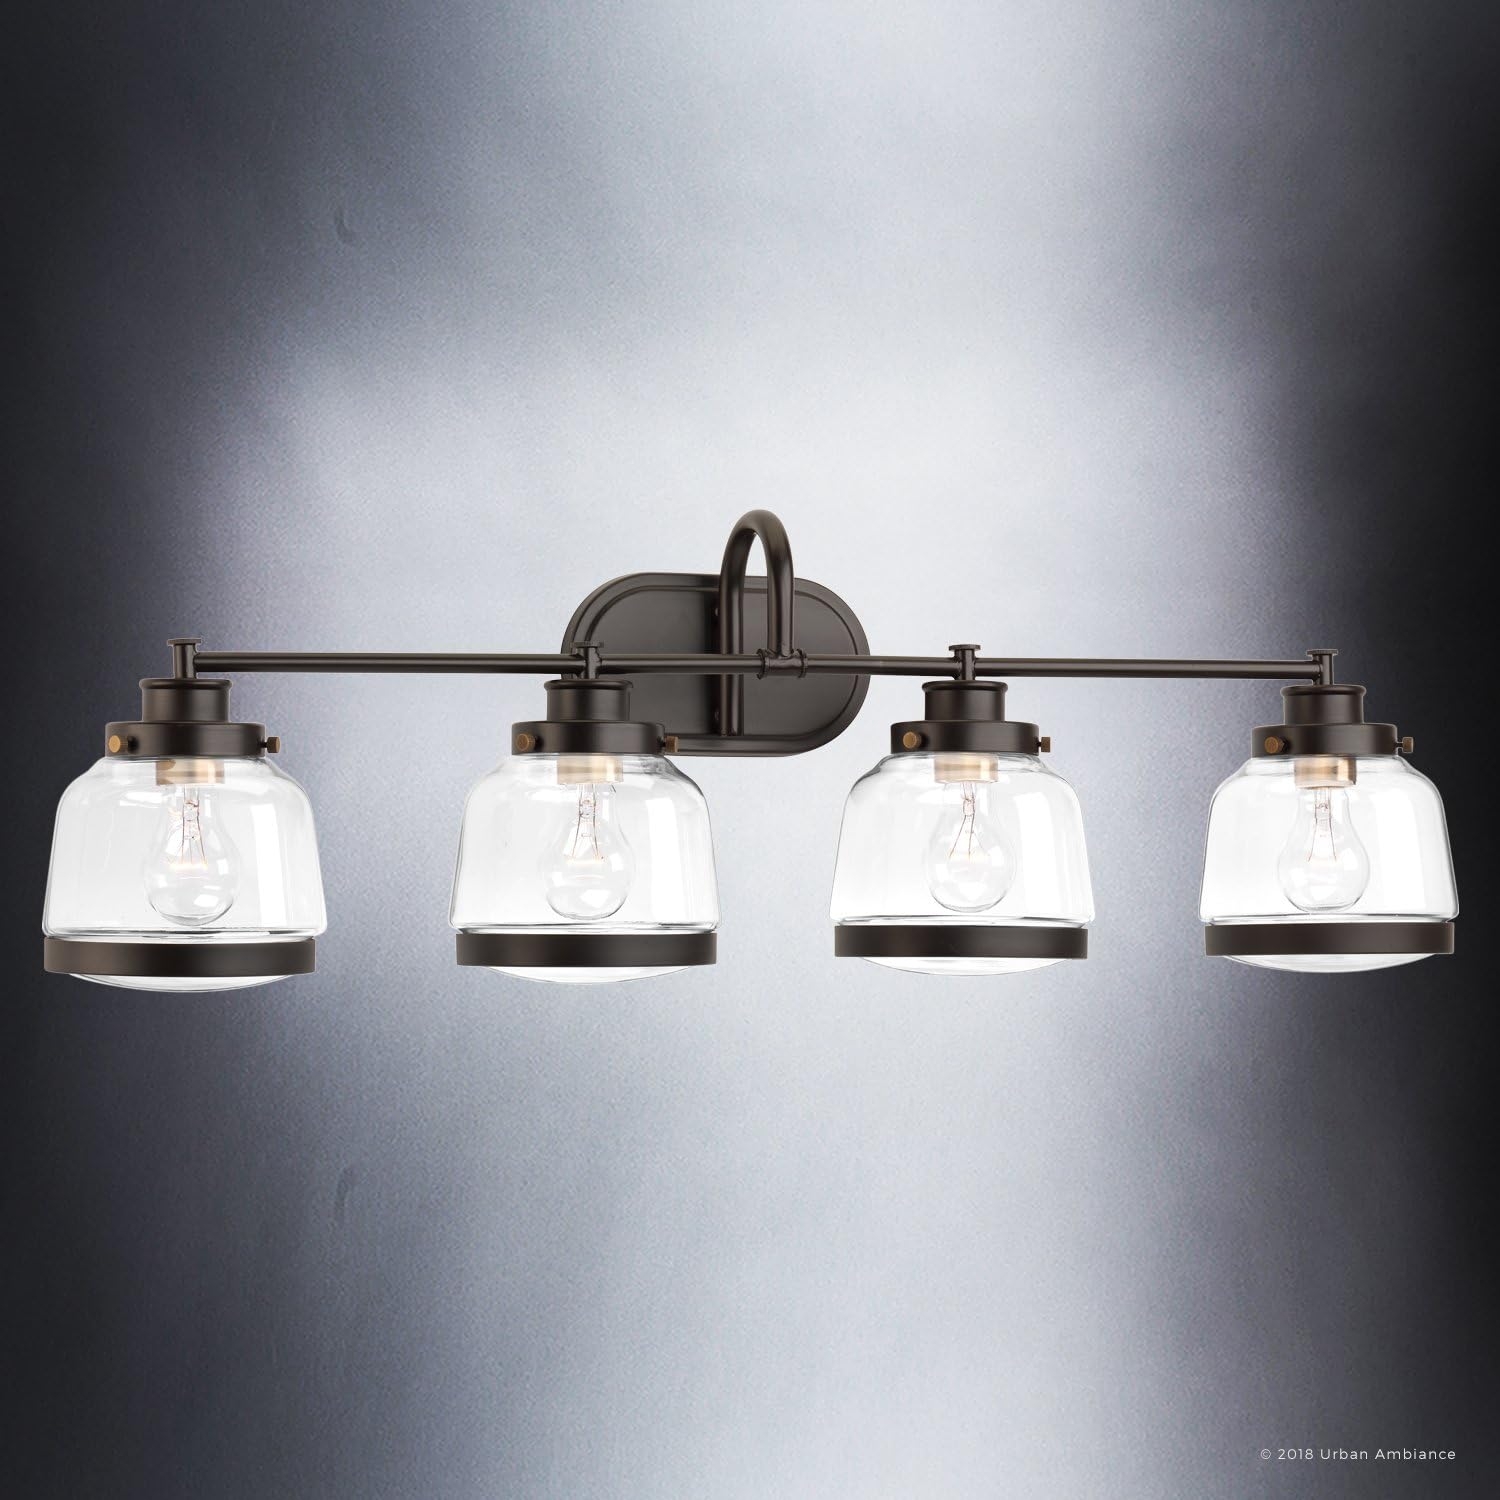 Luxury Industrial Chic Bathroom Vanity Light, Large Size: 11.25"H x 35.75"W, with Art Deco Style Elements, Olde Bronze Finish, UHP2541 from The Nottingham Collection by Urban Ambiance